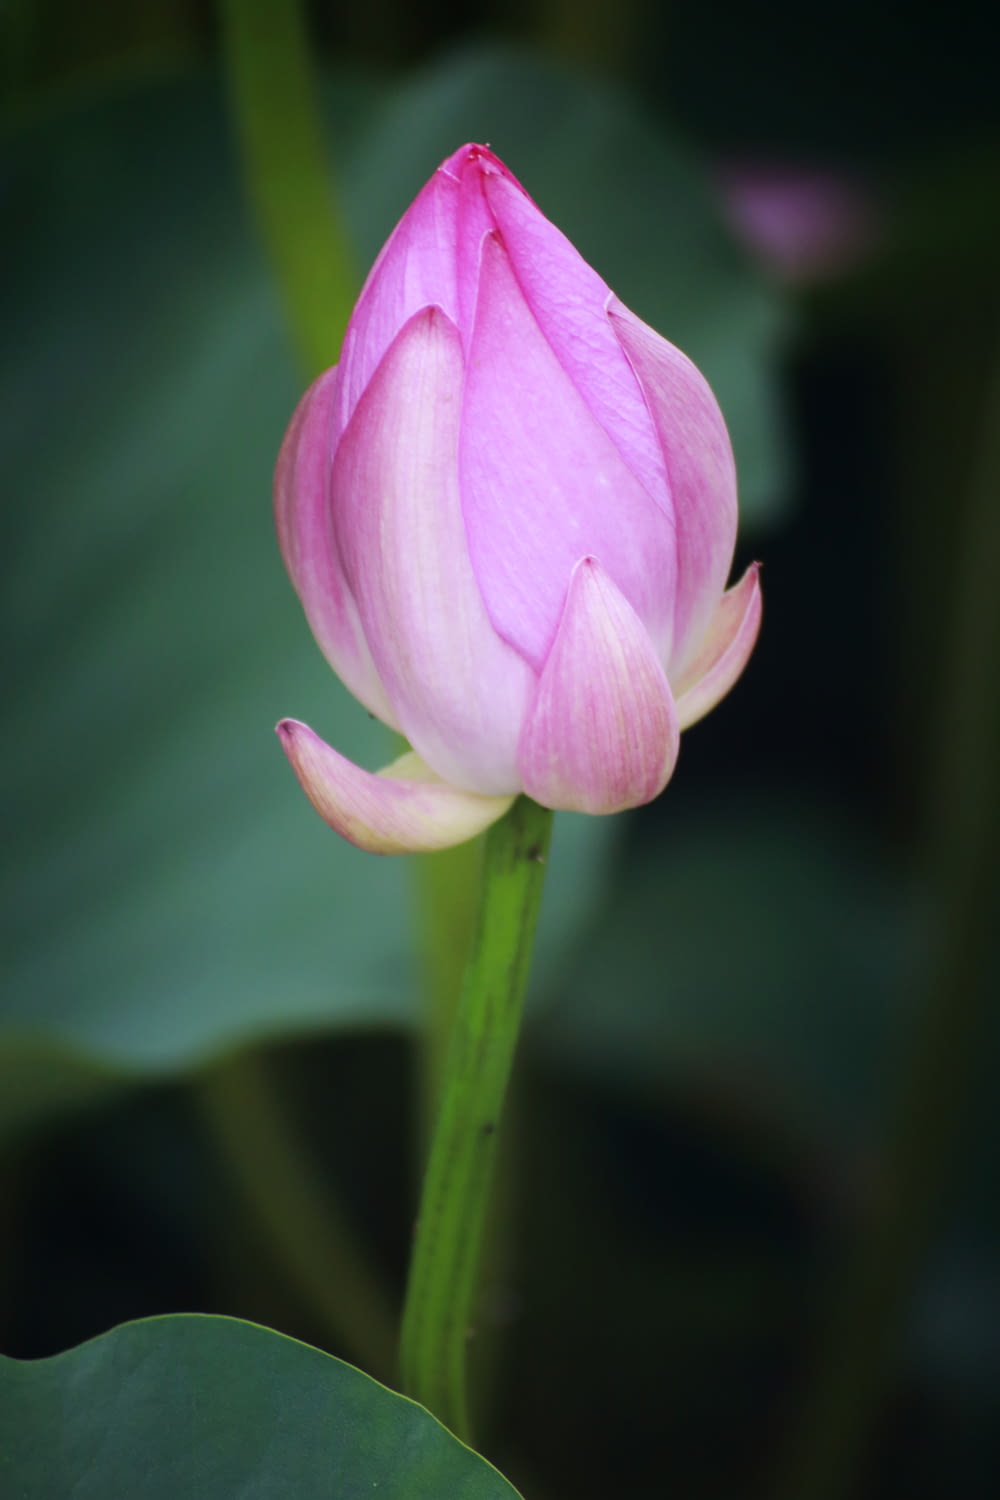 close-up of pink flower